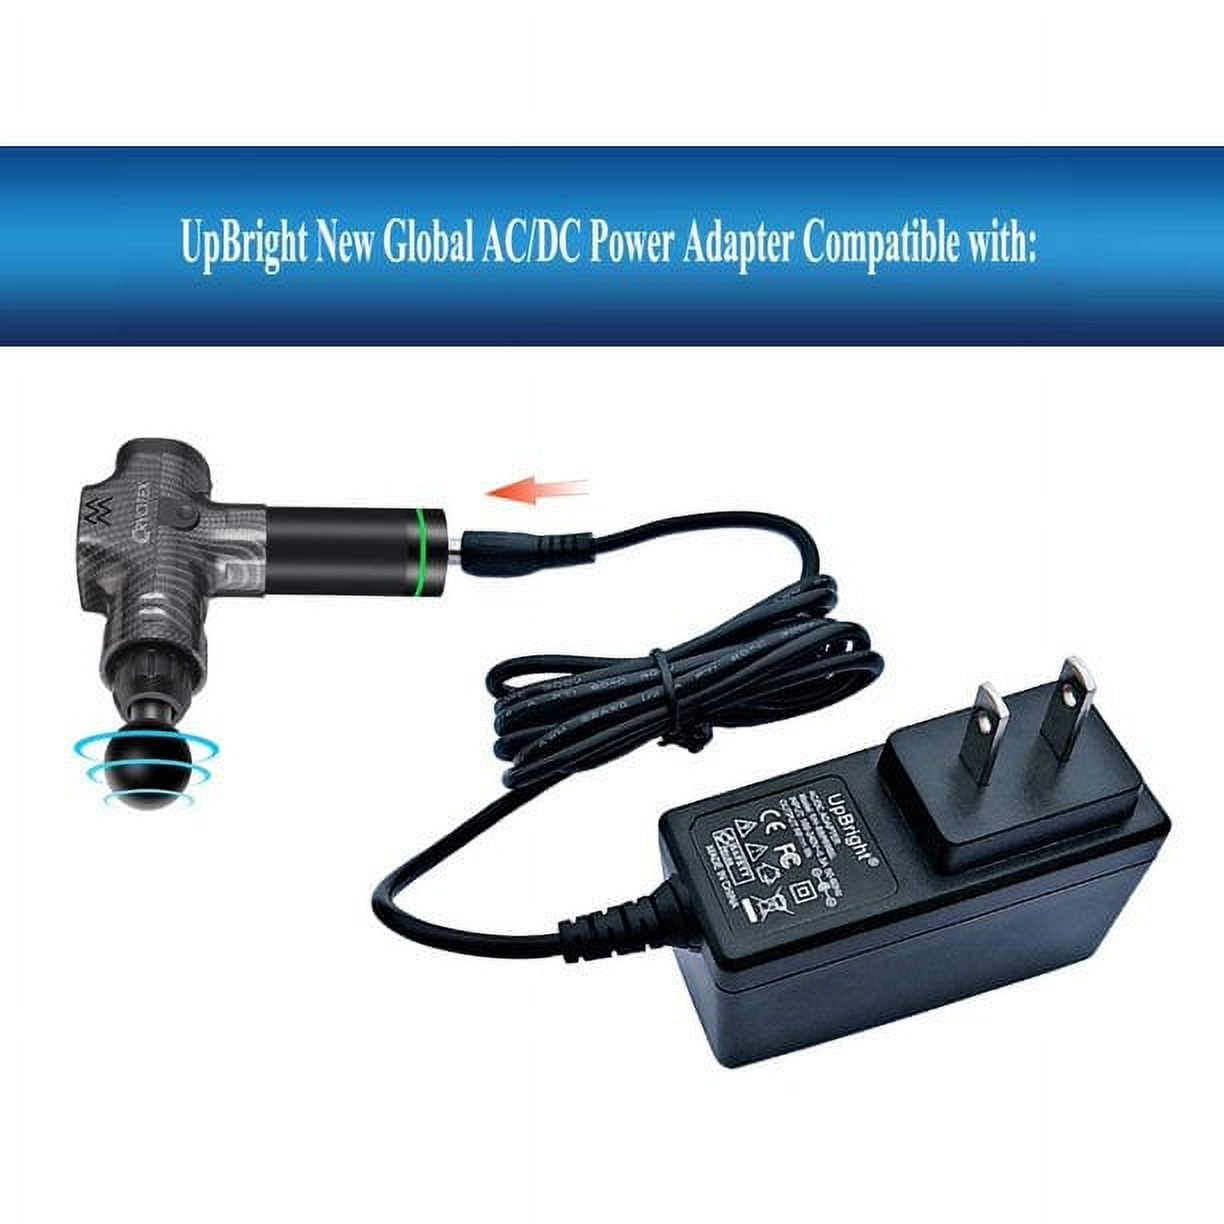 UpBright 16.8V AC/DC Adapter Compatible with Cryotex 1113 